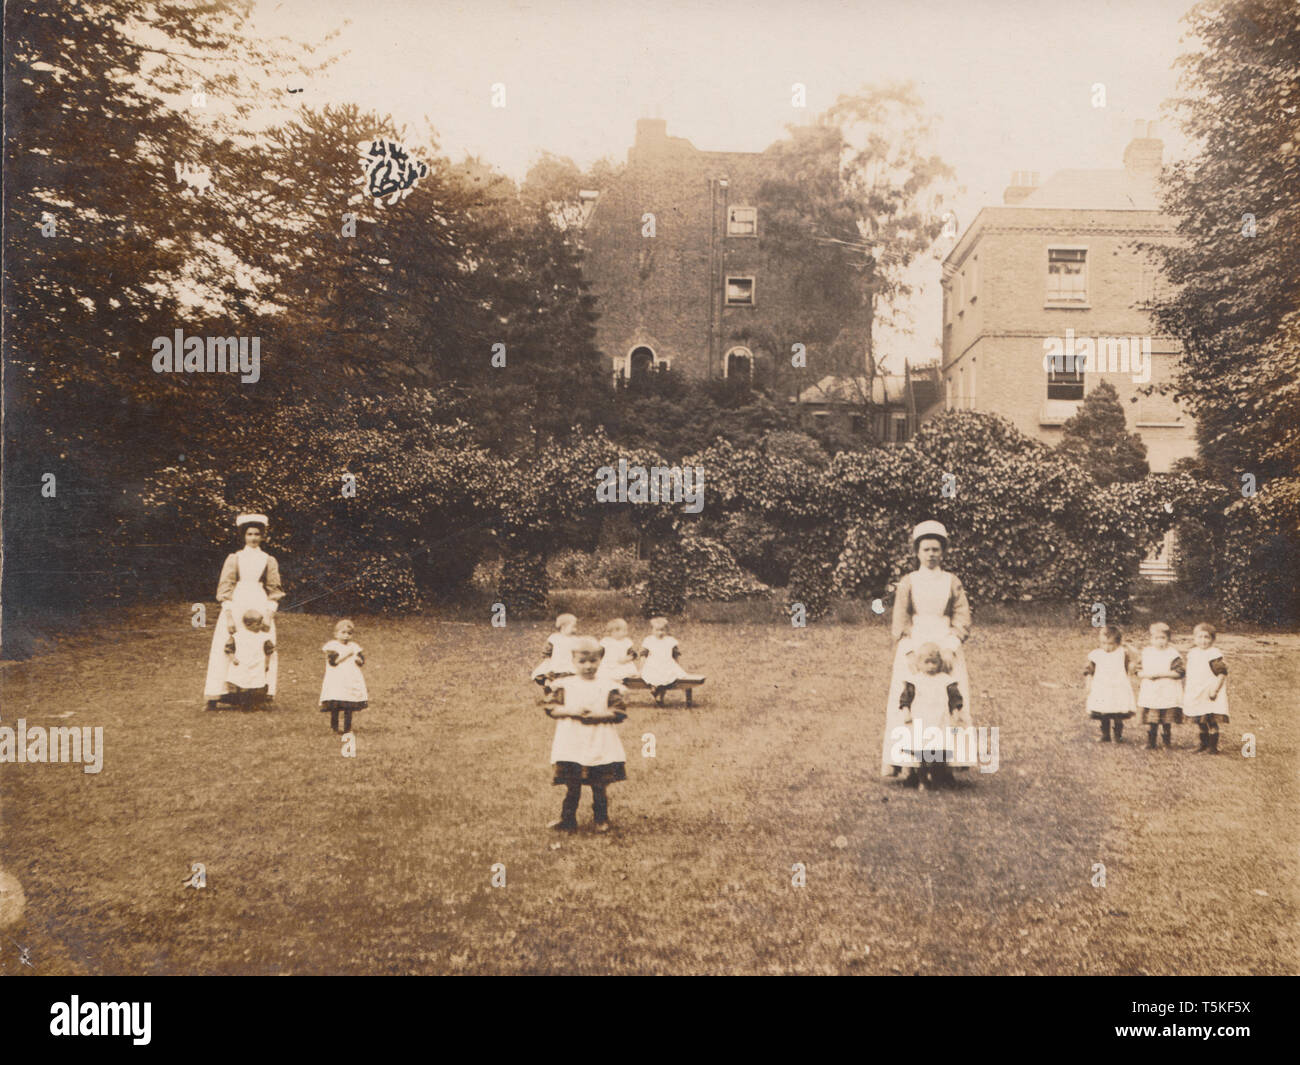 Vintage Photographic Postcard of a Chidren's Orphanage Possibly Called Percy House. Nurses and Children Enjoying Time in The Garden. Stock Photo